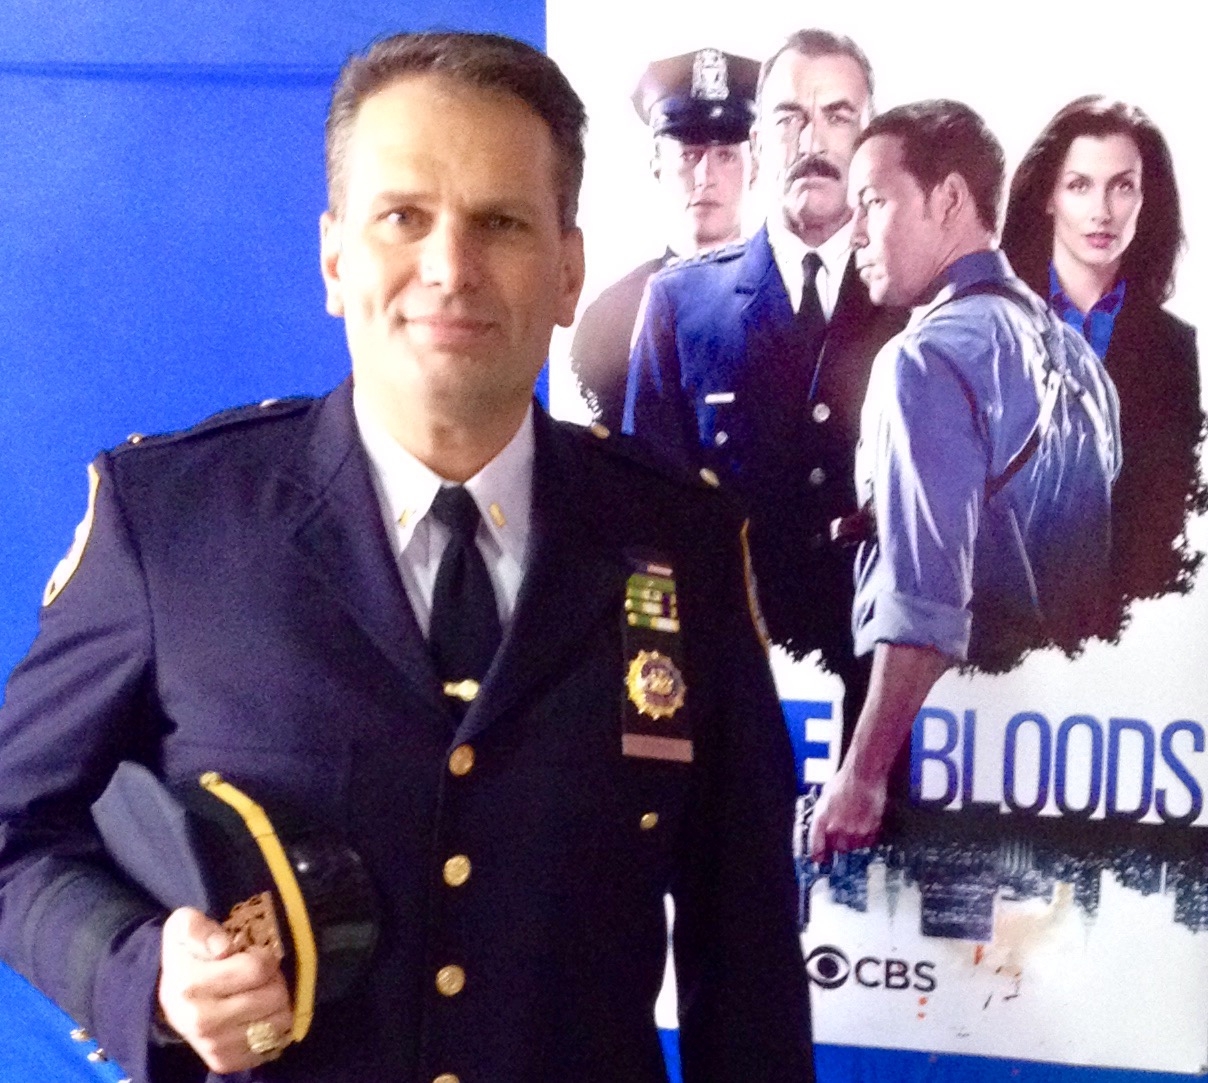 Recurring on CBS hit TV Show Blue Bloods.